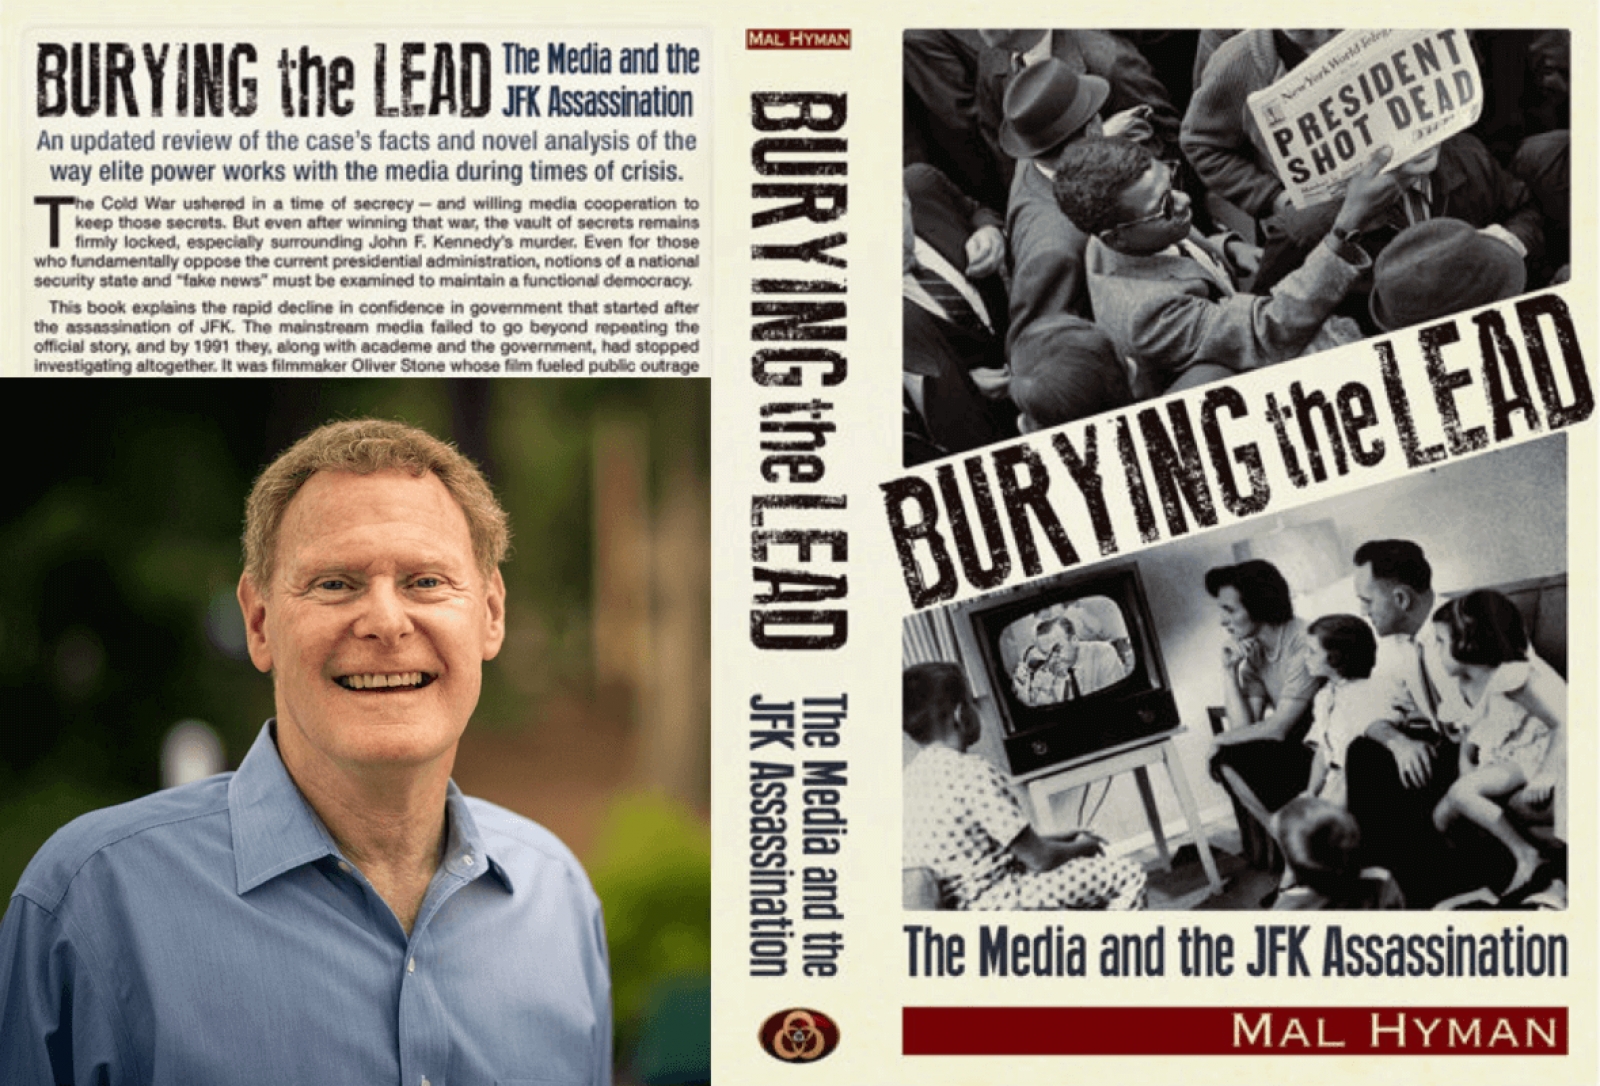 Mal Hyman, Burying the Lead: The Media and the JFK Assassination